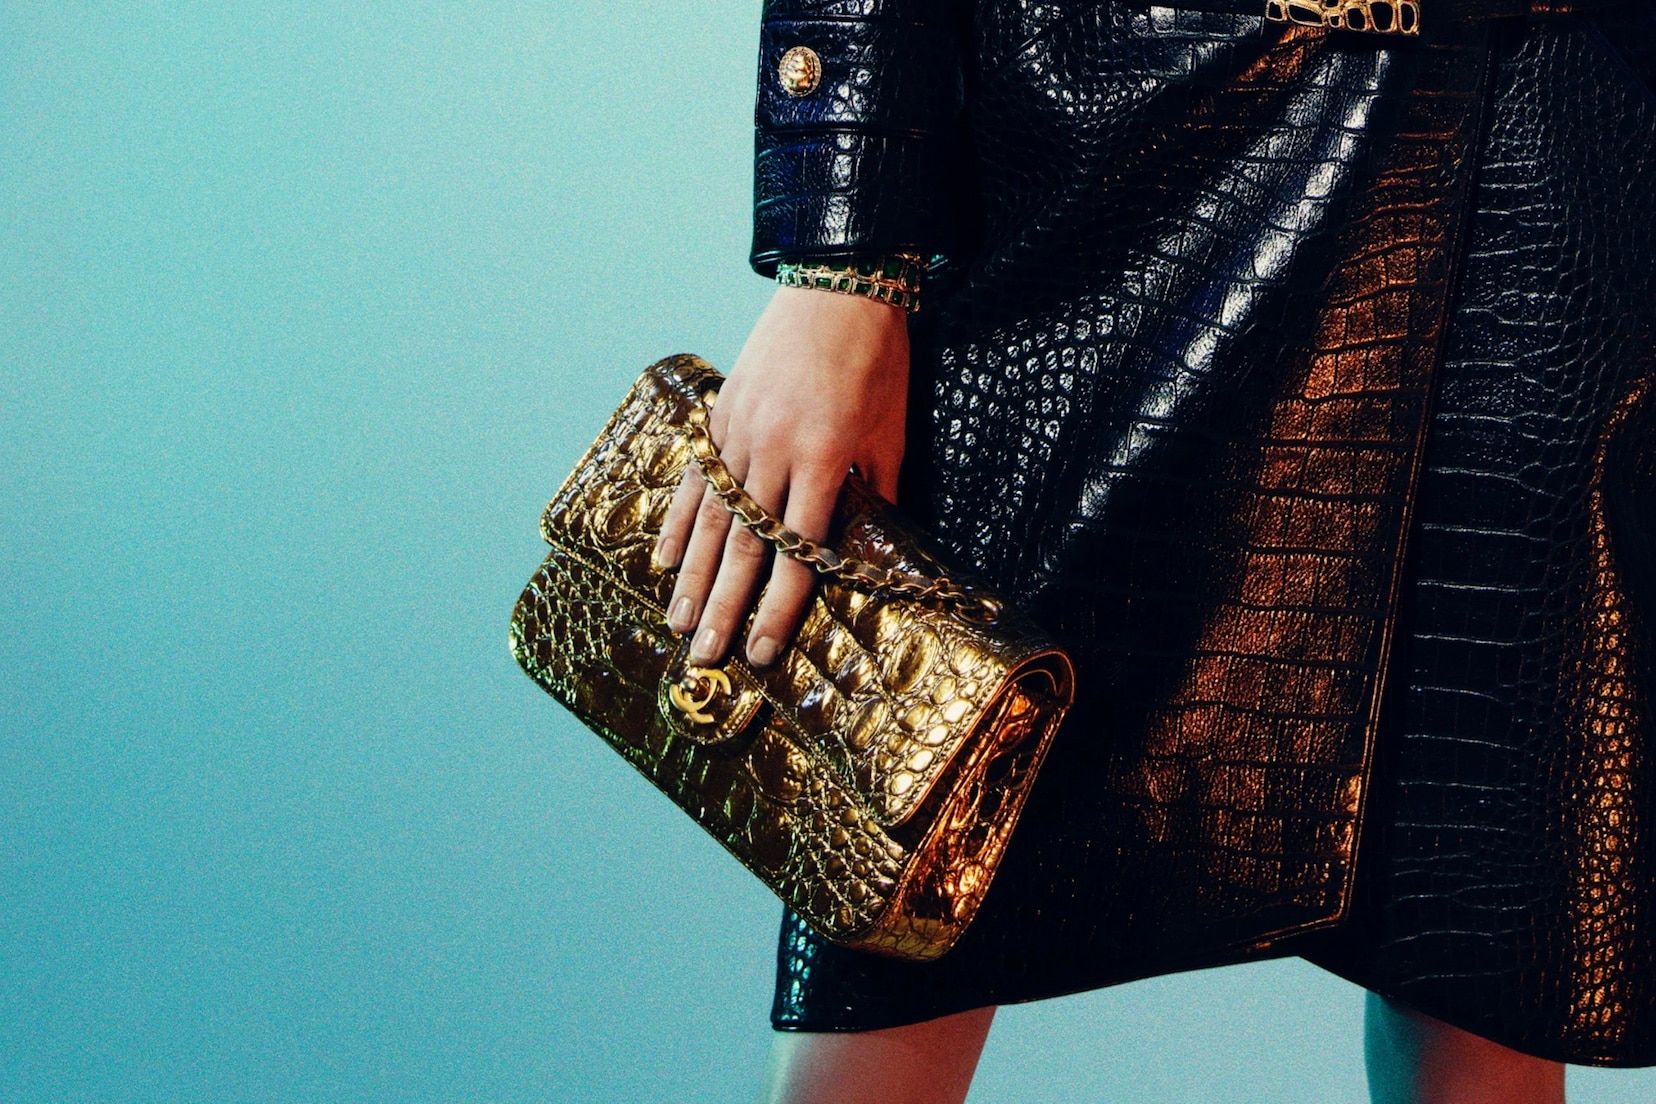 The story and details behind the Chanel  handbag